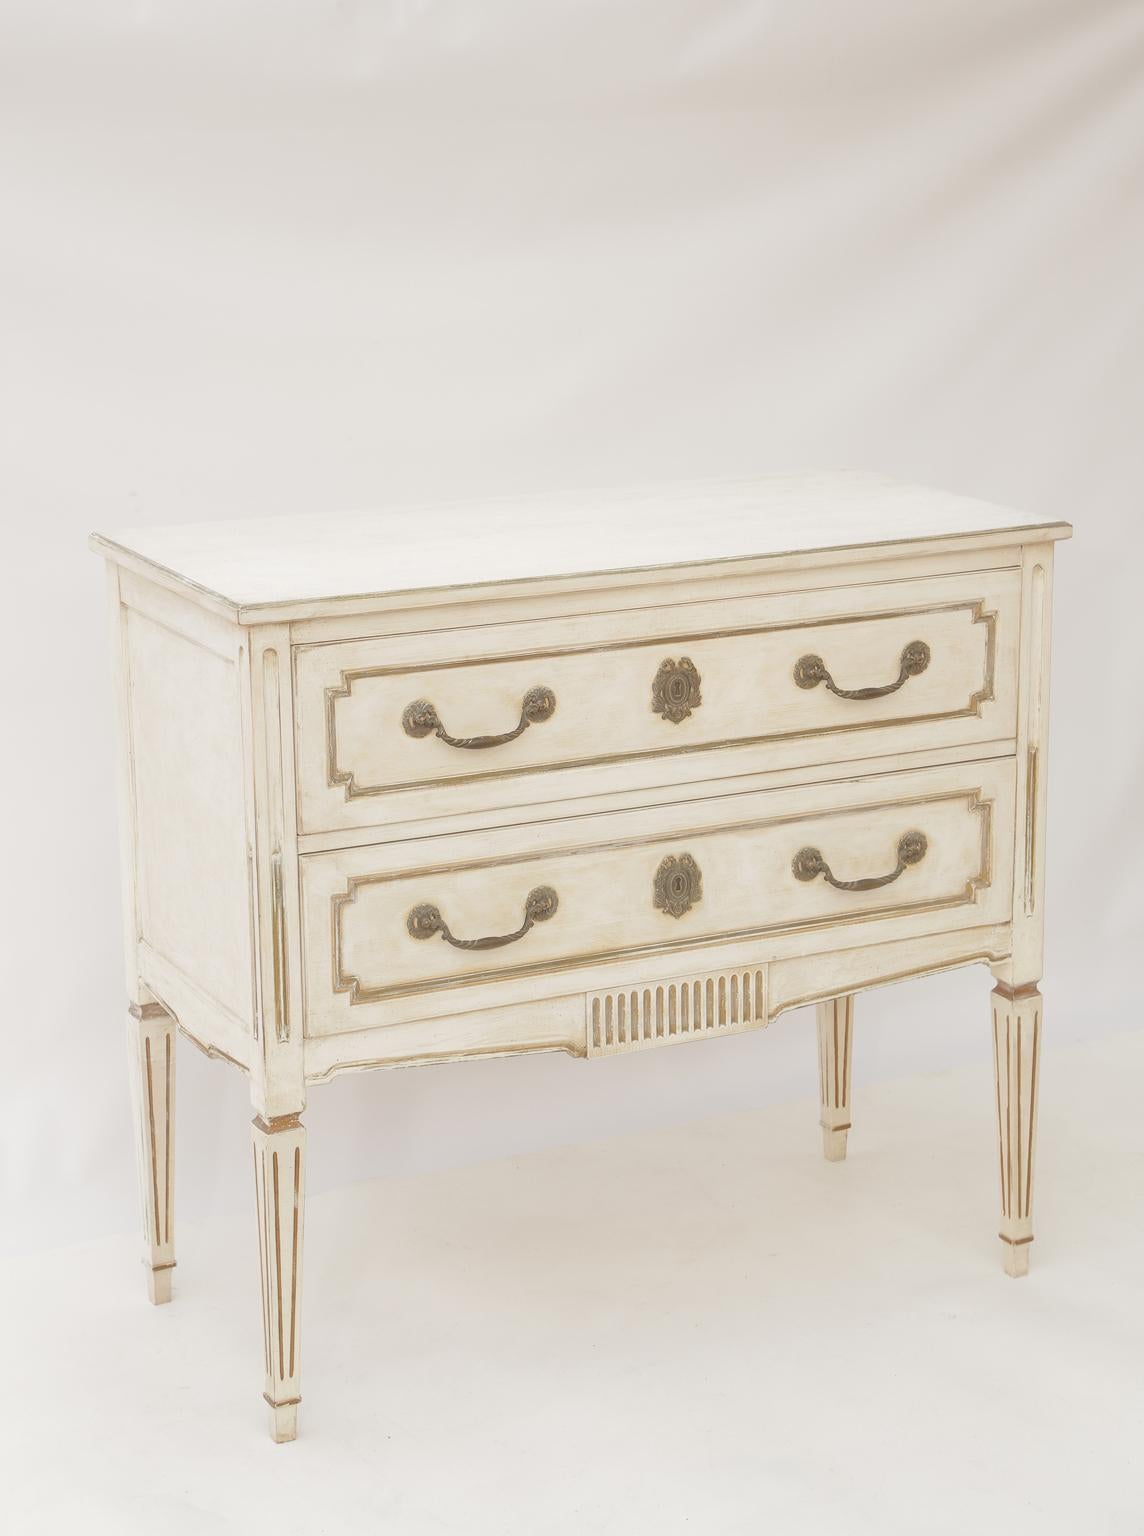 Vintage commode, by Henradon, in Directoire taste, having a painted and parcel-gilt finish showing natural wear, its rectangular top on a base of two stacked drawers with double pulls, centered by an escutcheon, framed by moldings, over a fluted